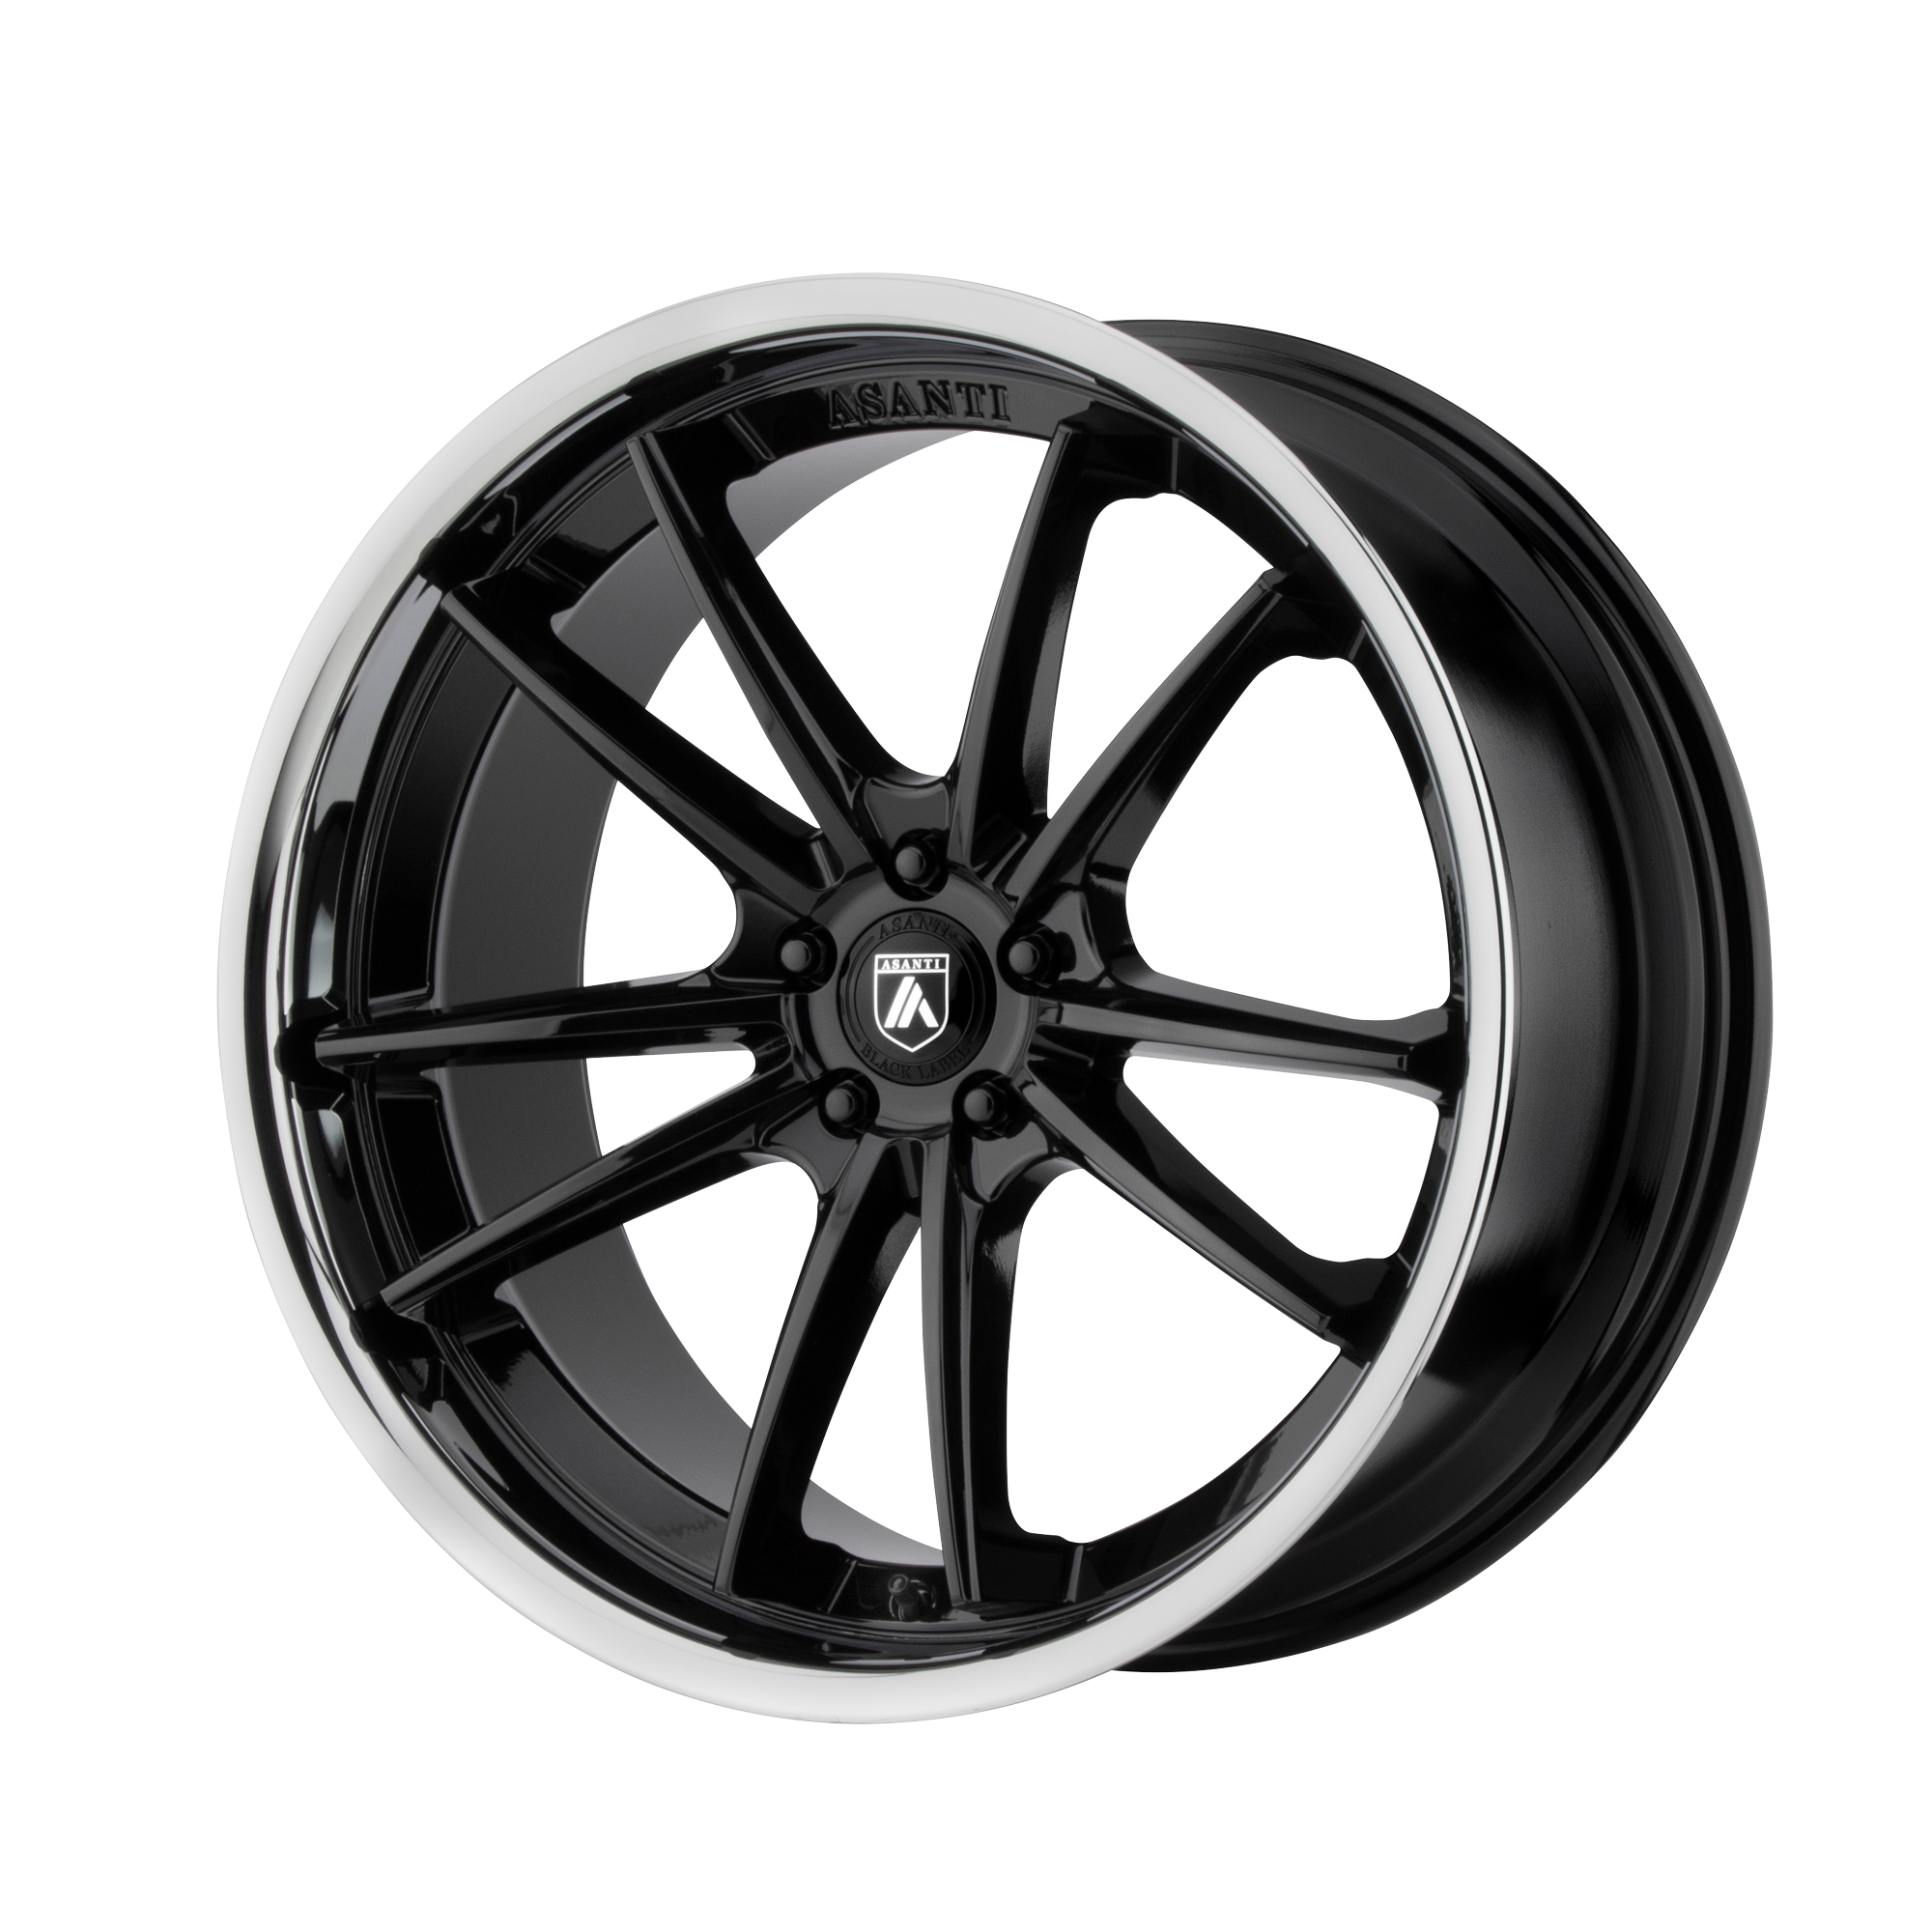 DELTA 24x9 Blank GLOSS BLACK W/ CHROME LIP (15 mm) - Tires and Engine Performance